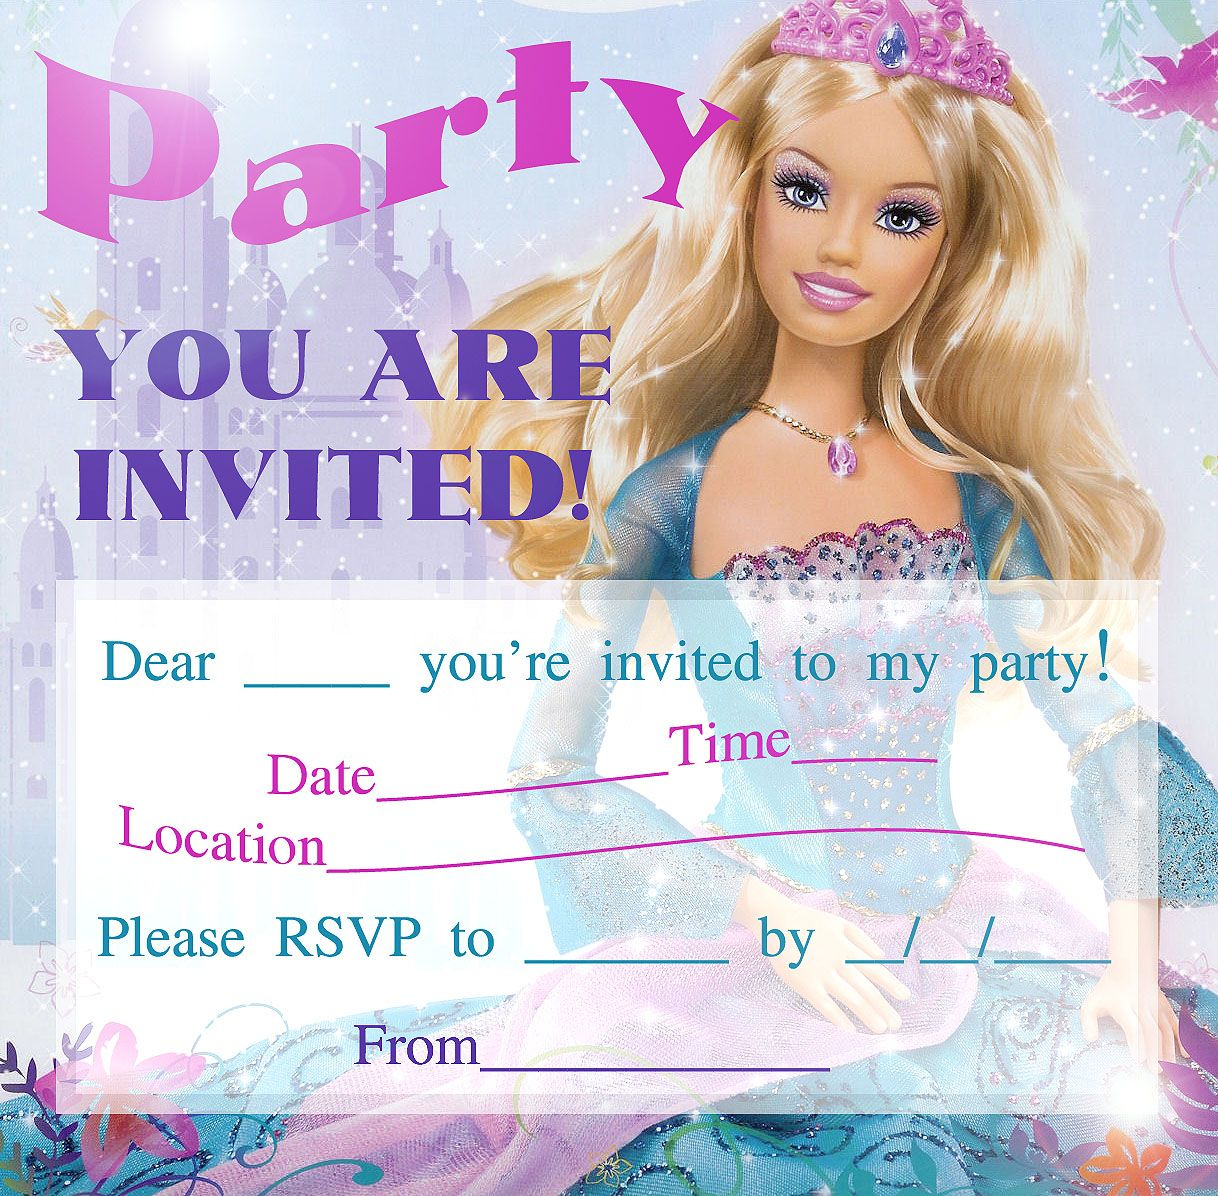 Barbie Coloring Pages: Barbie Printable Invitations For A Party - Free Printable Barbie Birthday Party Invitations